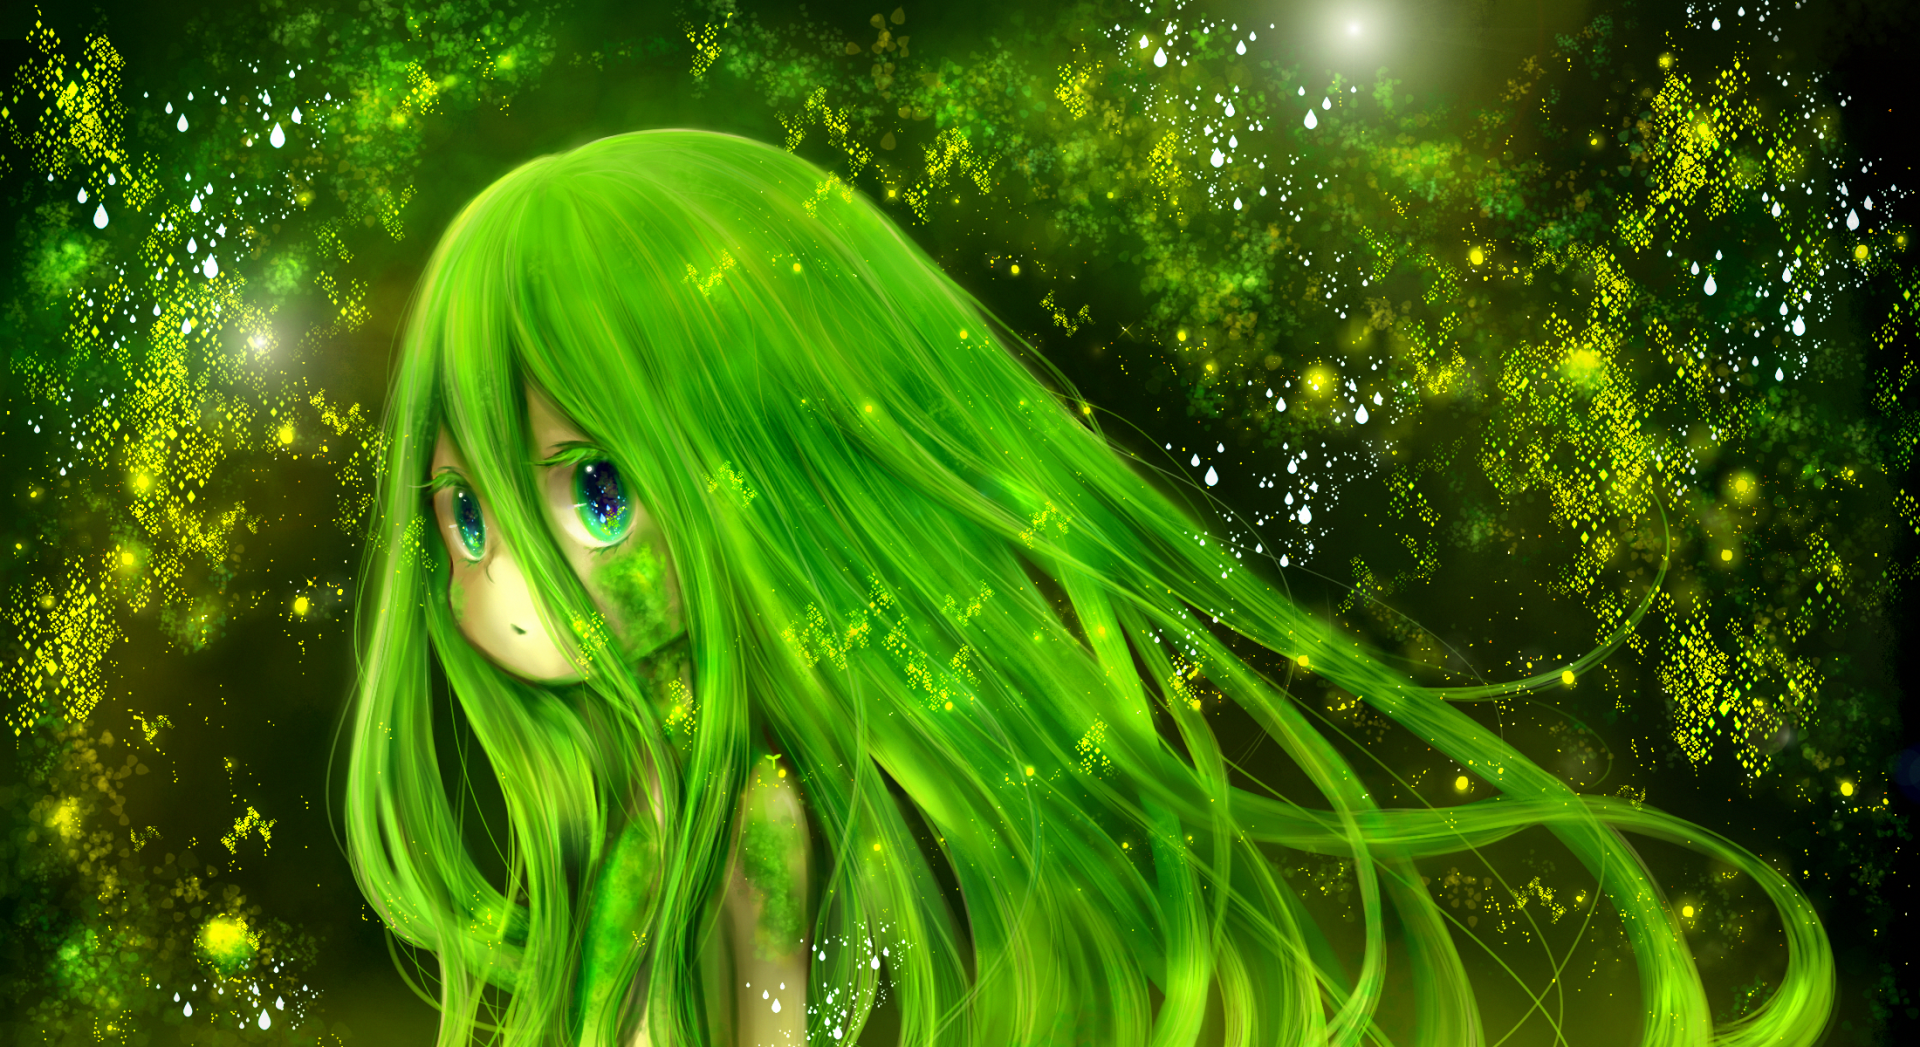 Luck 'o' The Anime – Favorite Green Haired Anime Characters – We be bloggin'